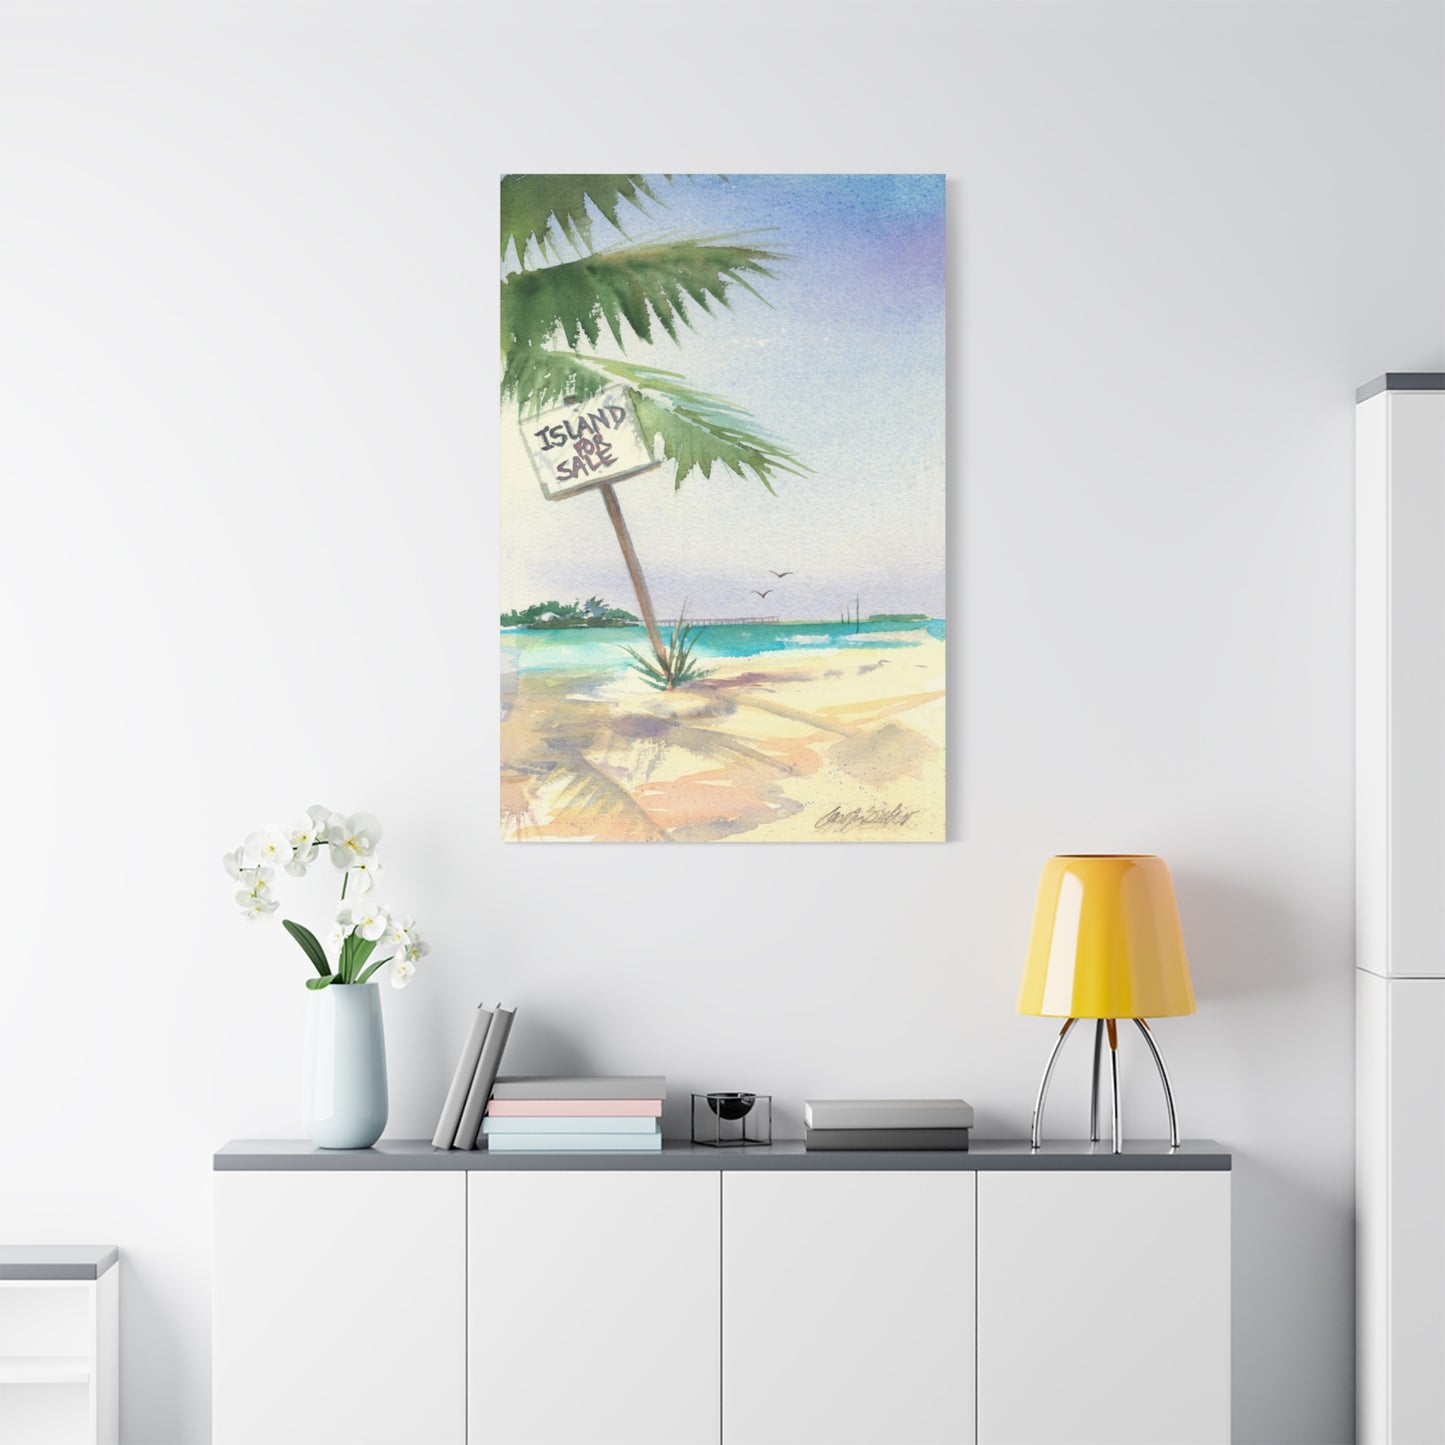 Island for Sale - Canvas